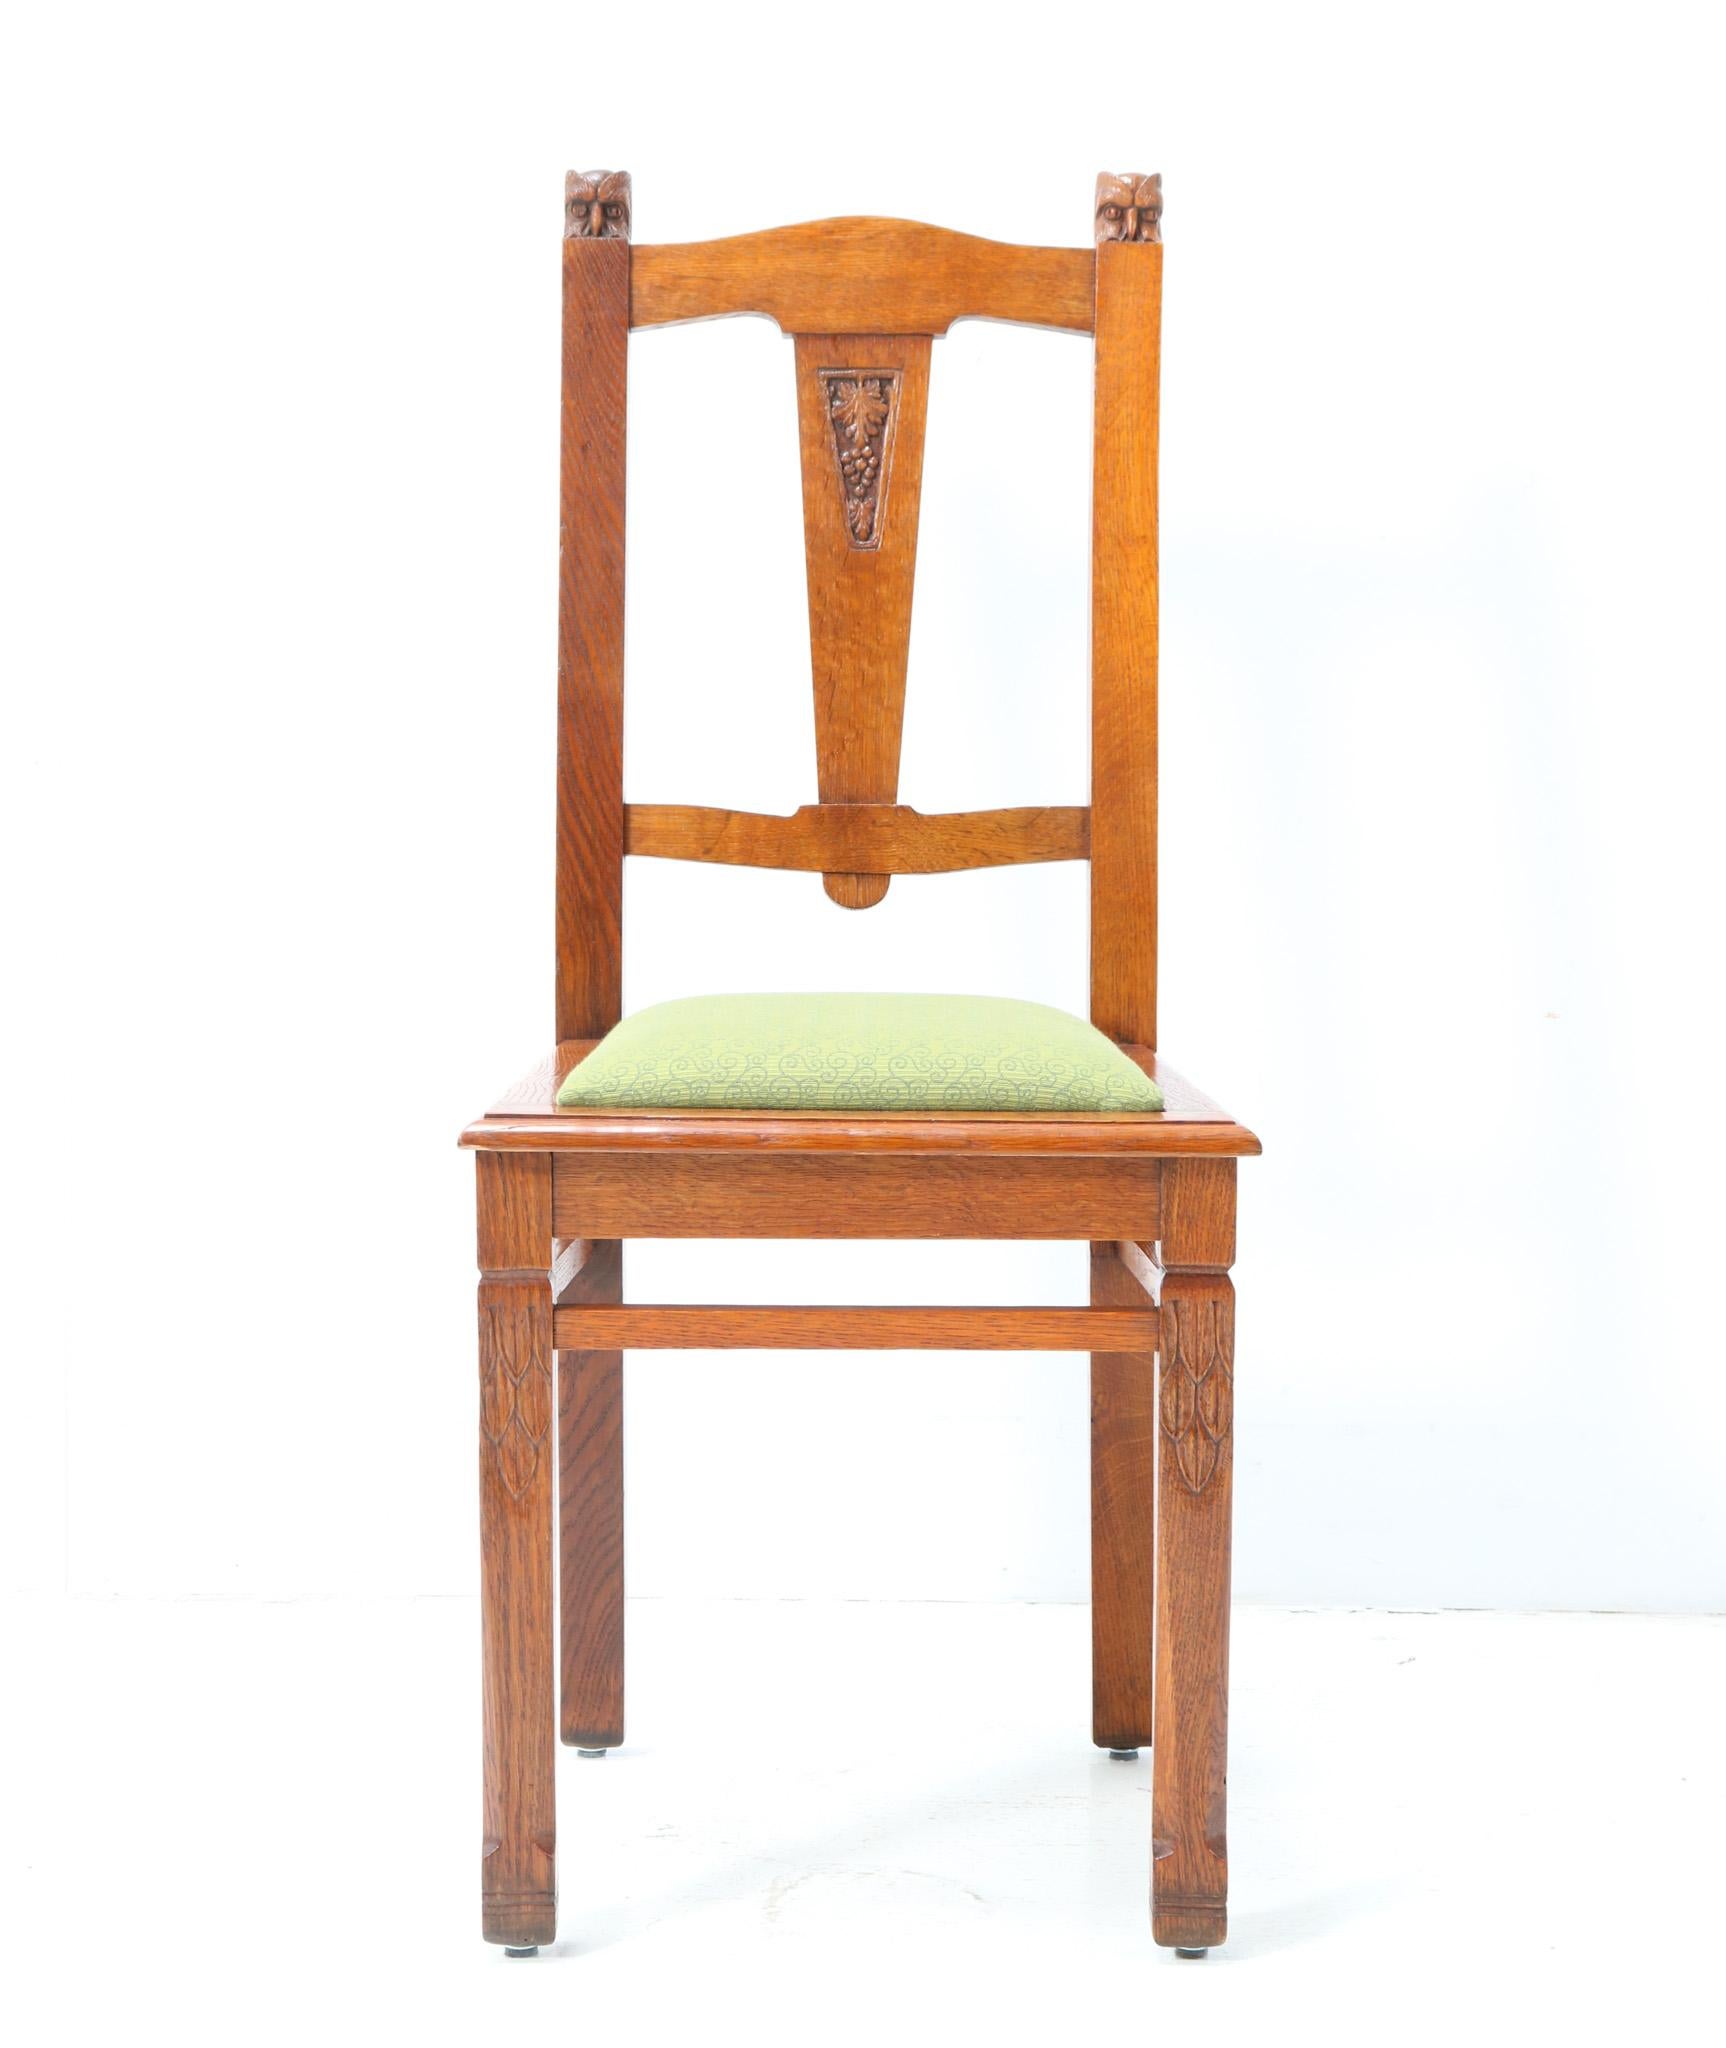 Magnificent and rare Arts & Crafts Art Nouveau side chair.
Design by Kobus de Graaff, a famous Dutch artist, furniture maker and sculptor.
Striking Dutch design from the 1900s.
Solid oak frame with hand-carved decorations and on top of the backrest